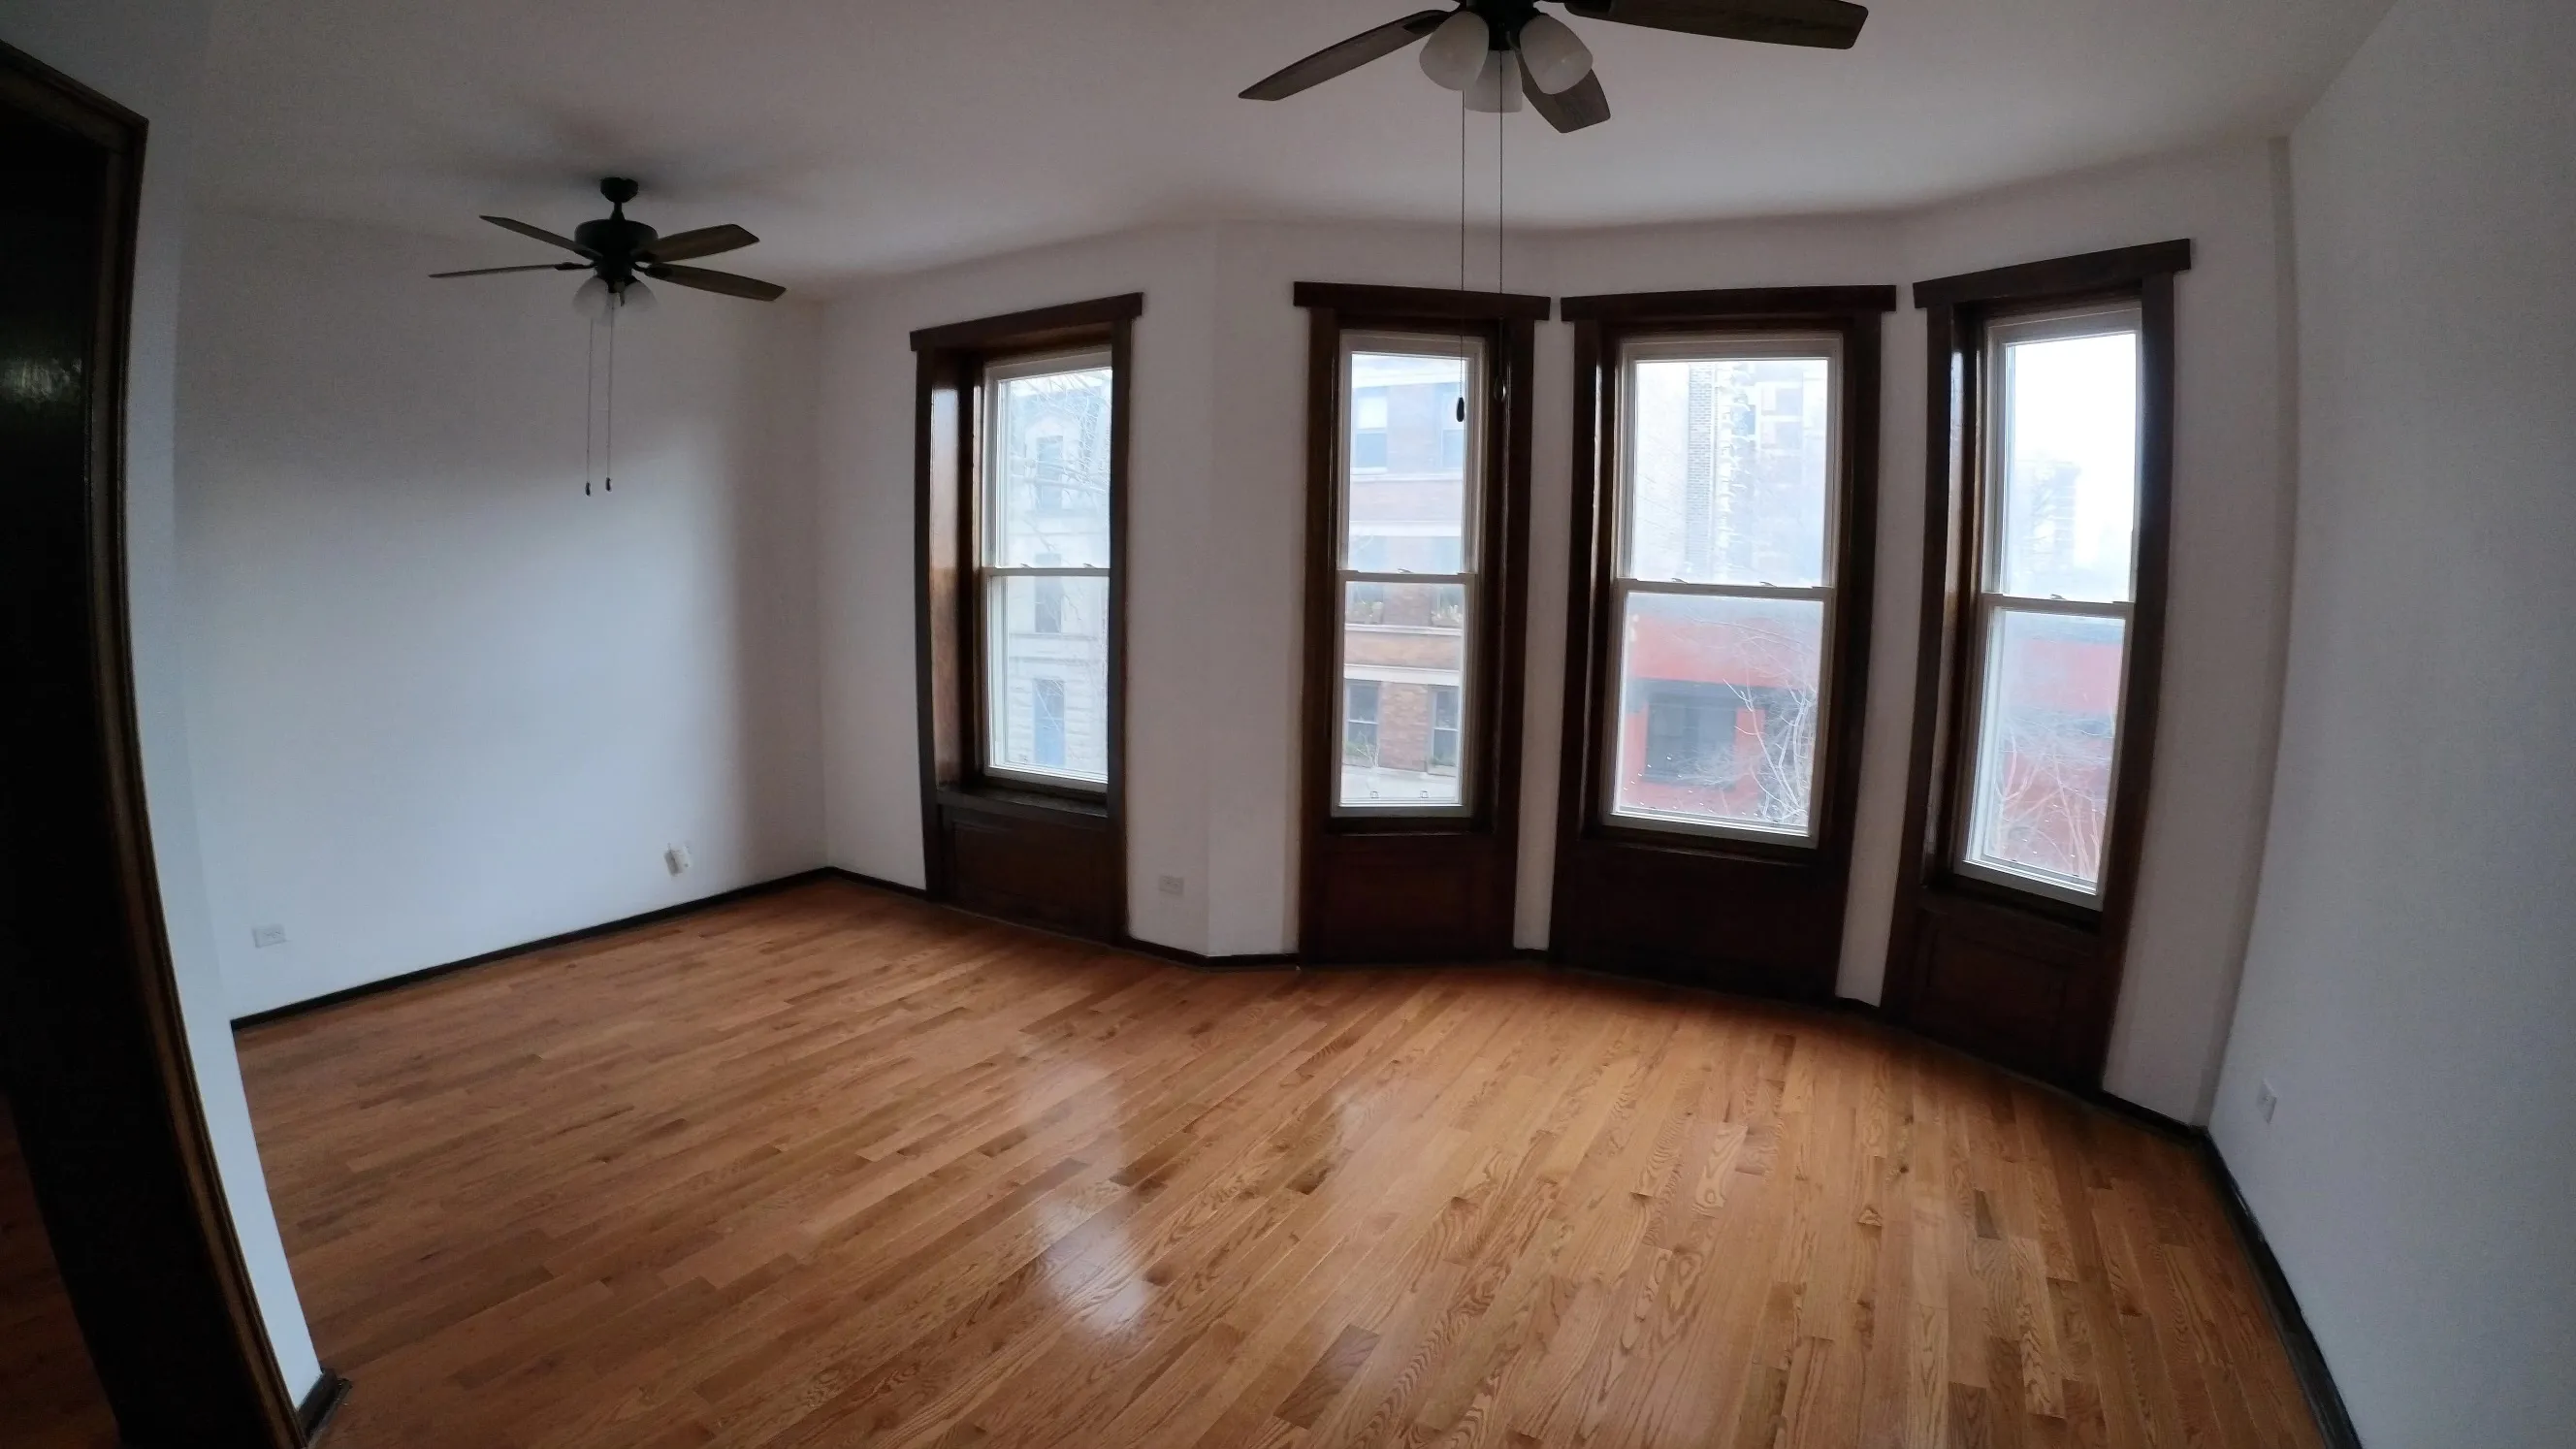 538 W WRIGHTWOOD AVE 60614-unit#02-Chicago-IL